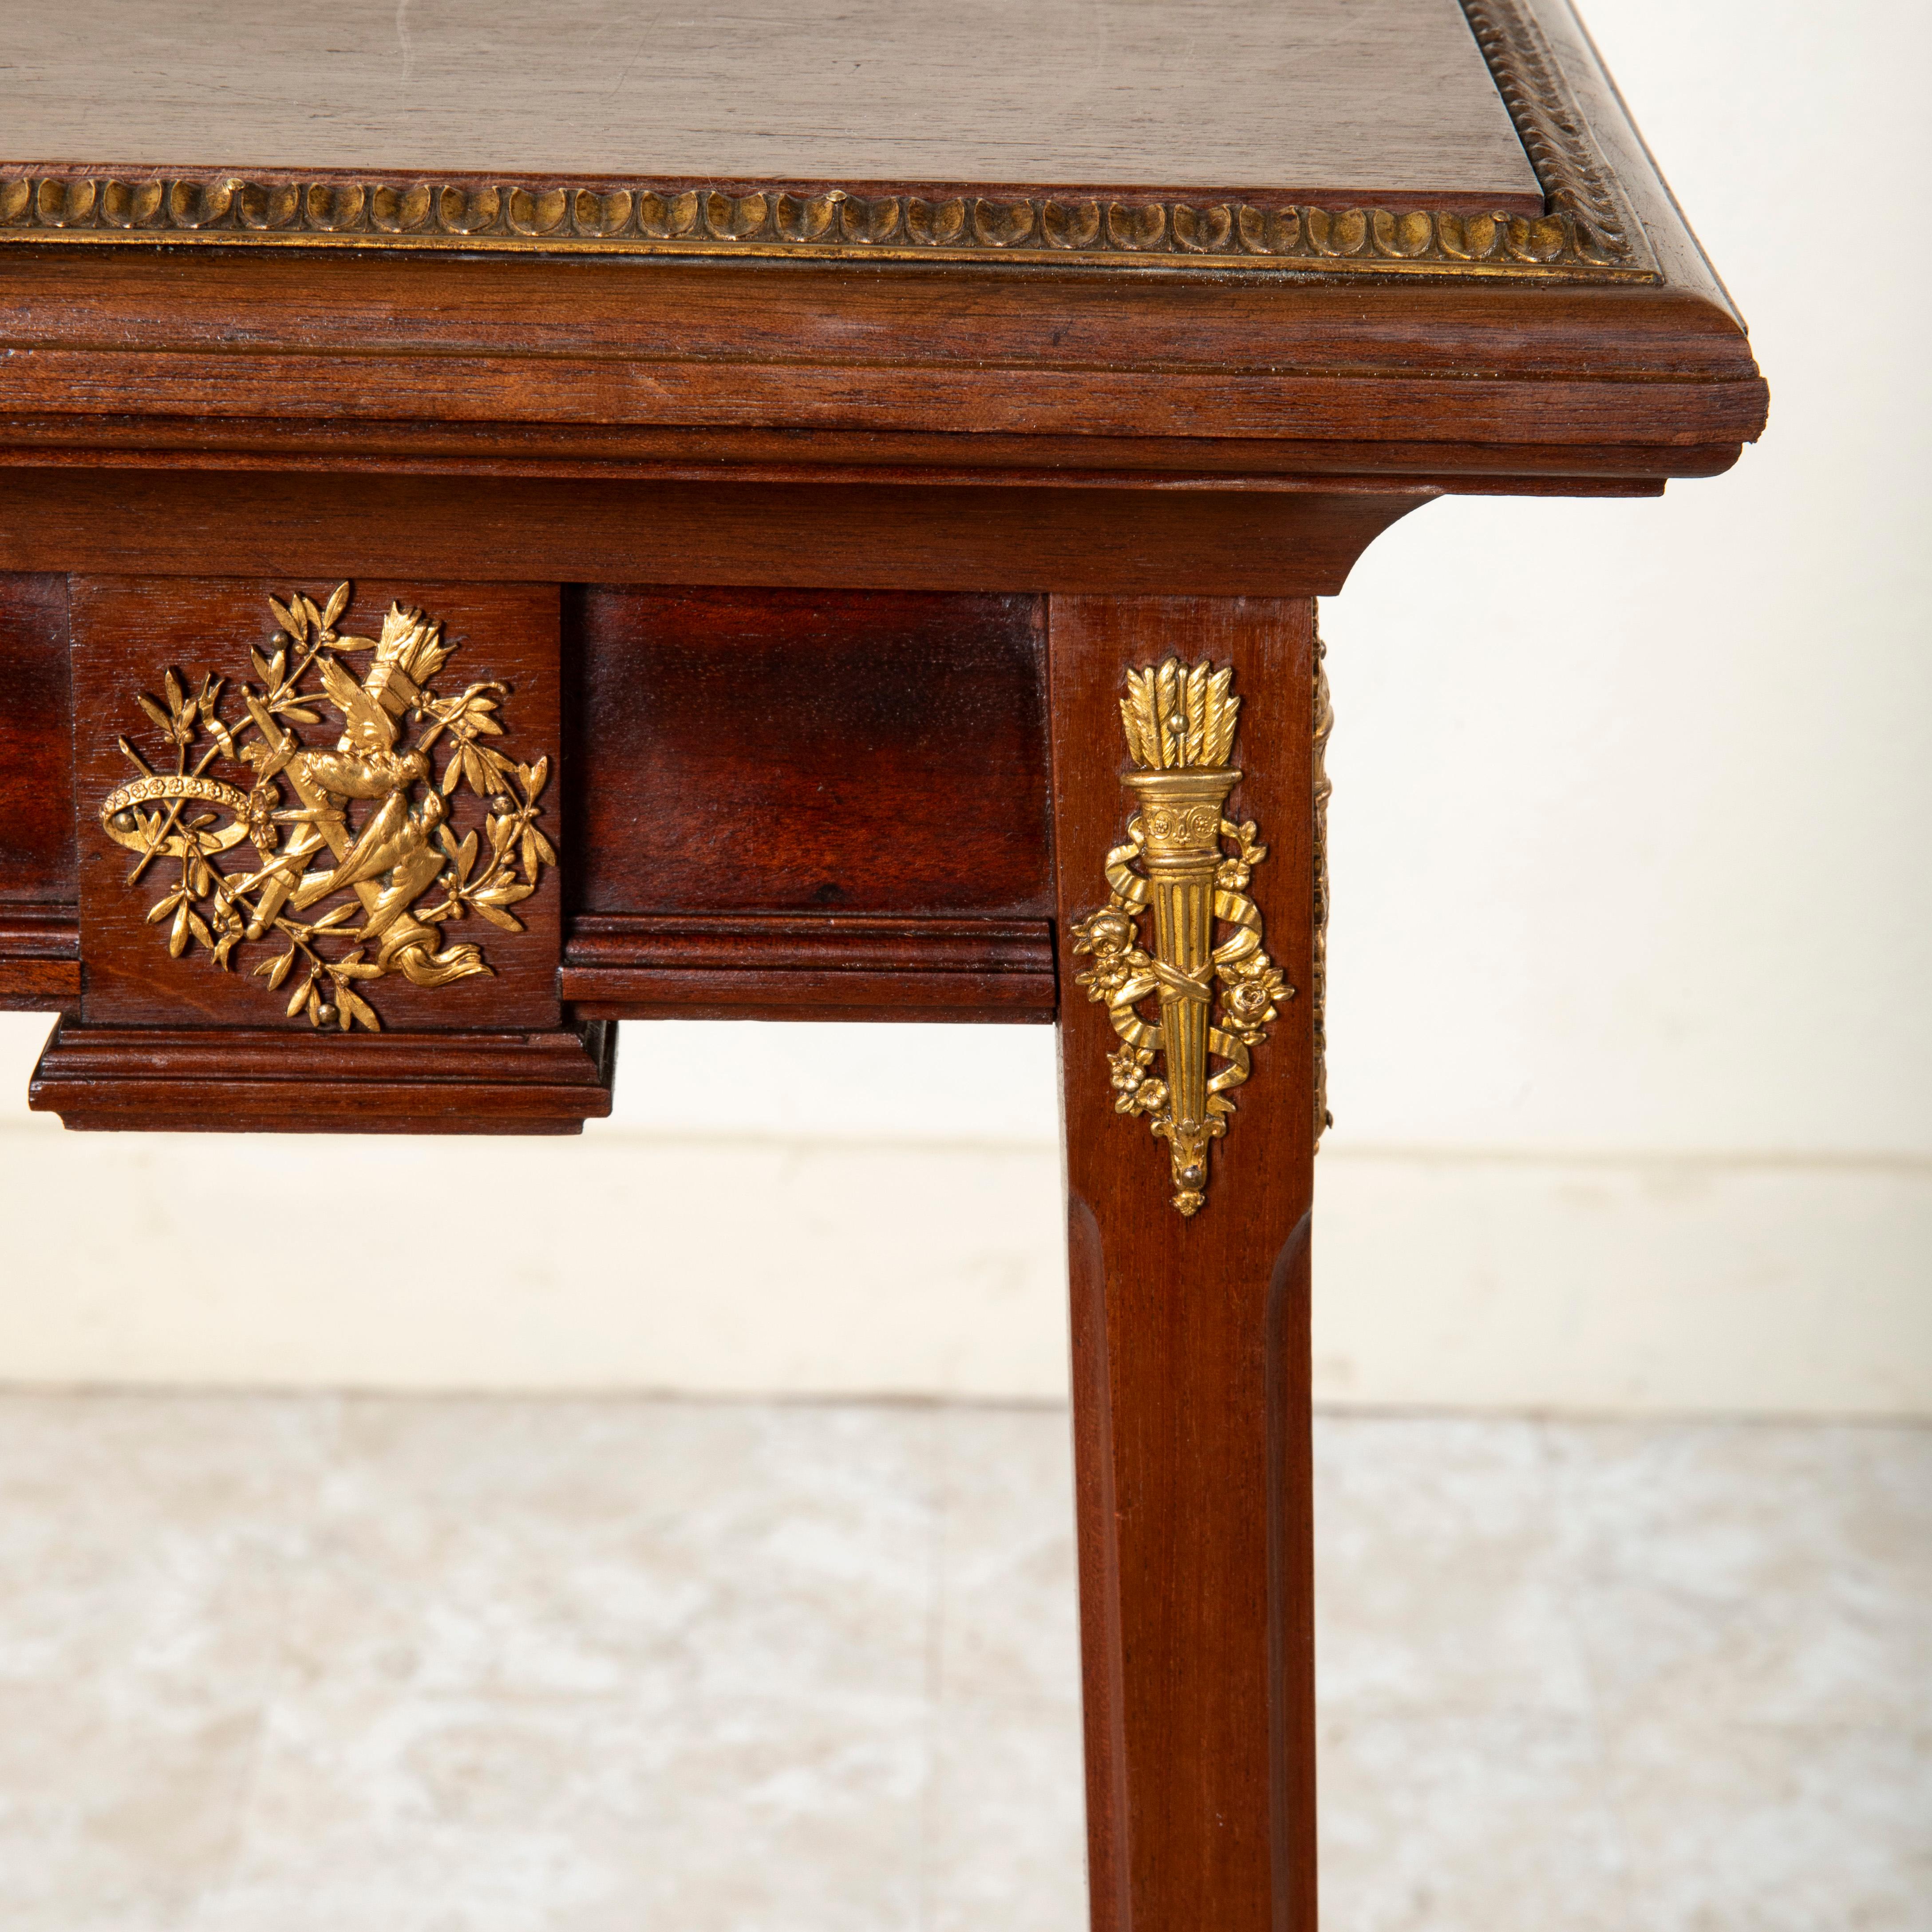 French Cherry Wood Pedestal Table with Bronze Plaques of Artisan Motifs c. 1900 For Sale 5